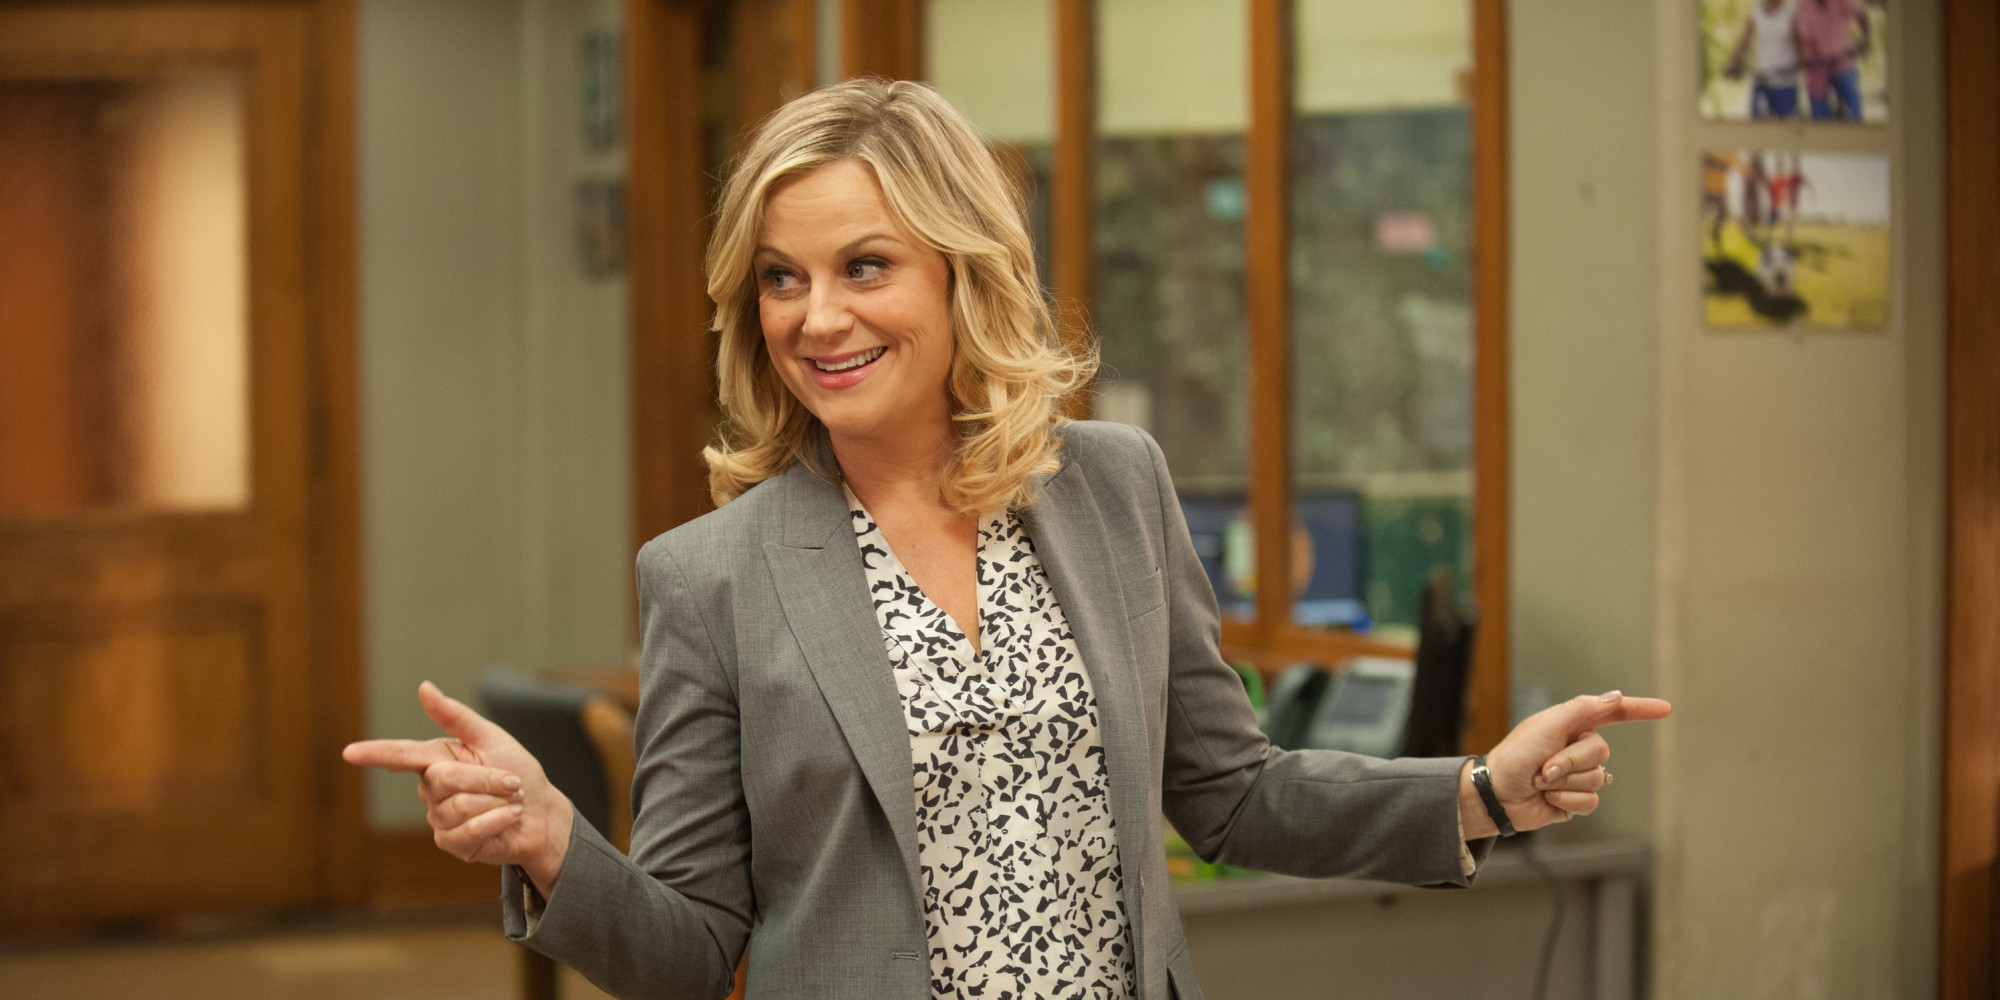 7 Reasons Why We Want Leslie Knope for President